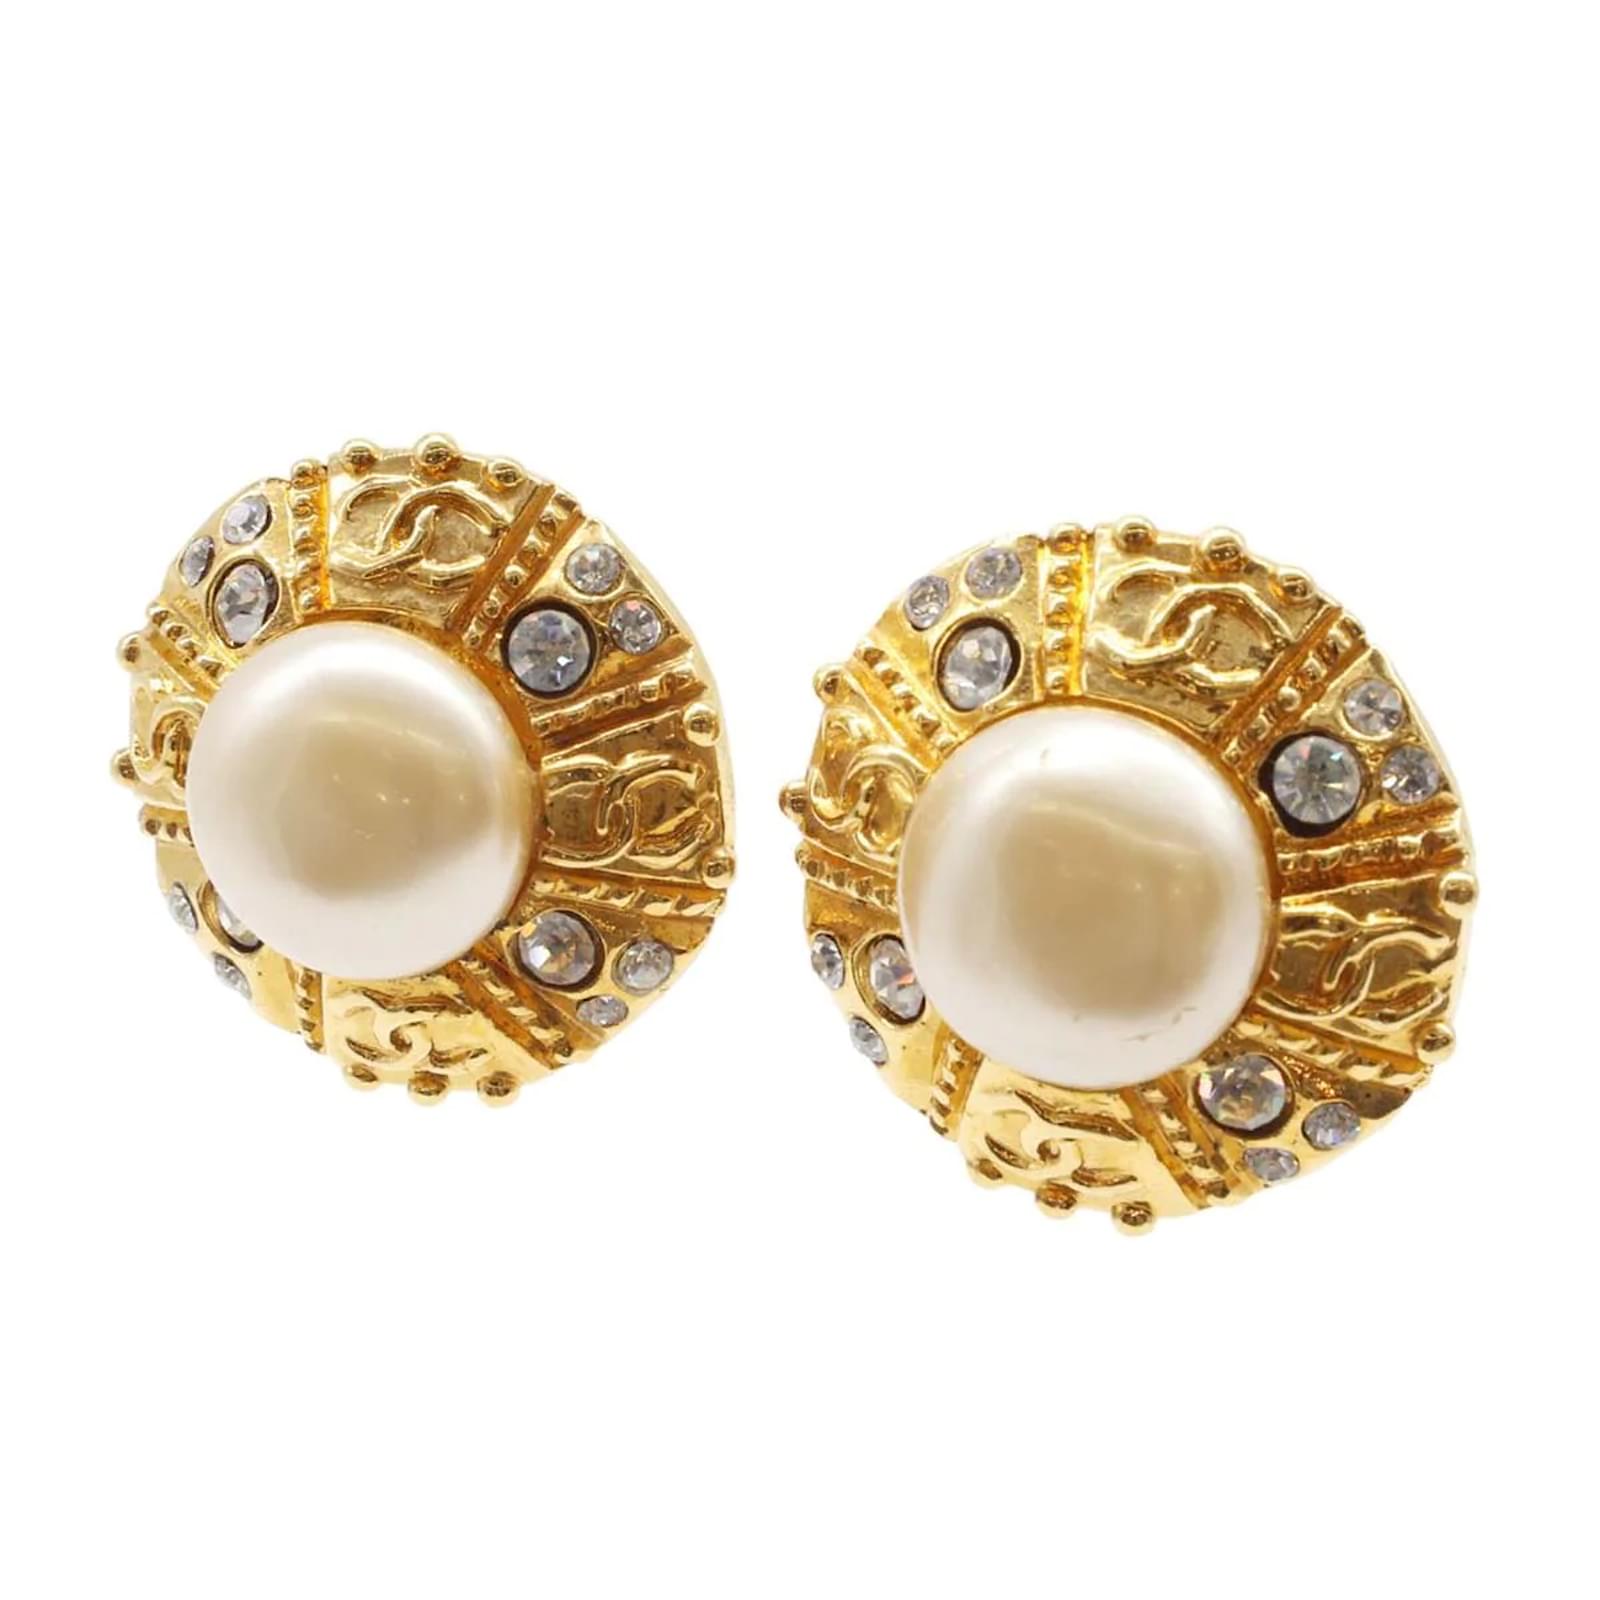 Chanel Round Clip On Earrings with Faux Pearl - Chanel